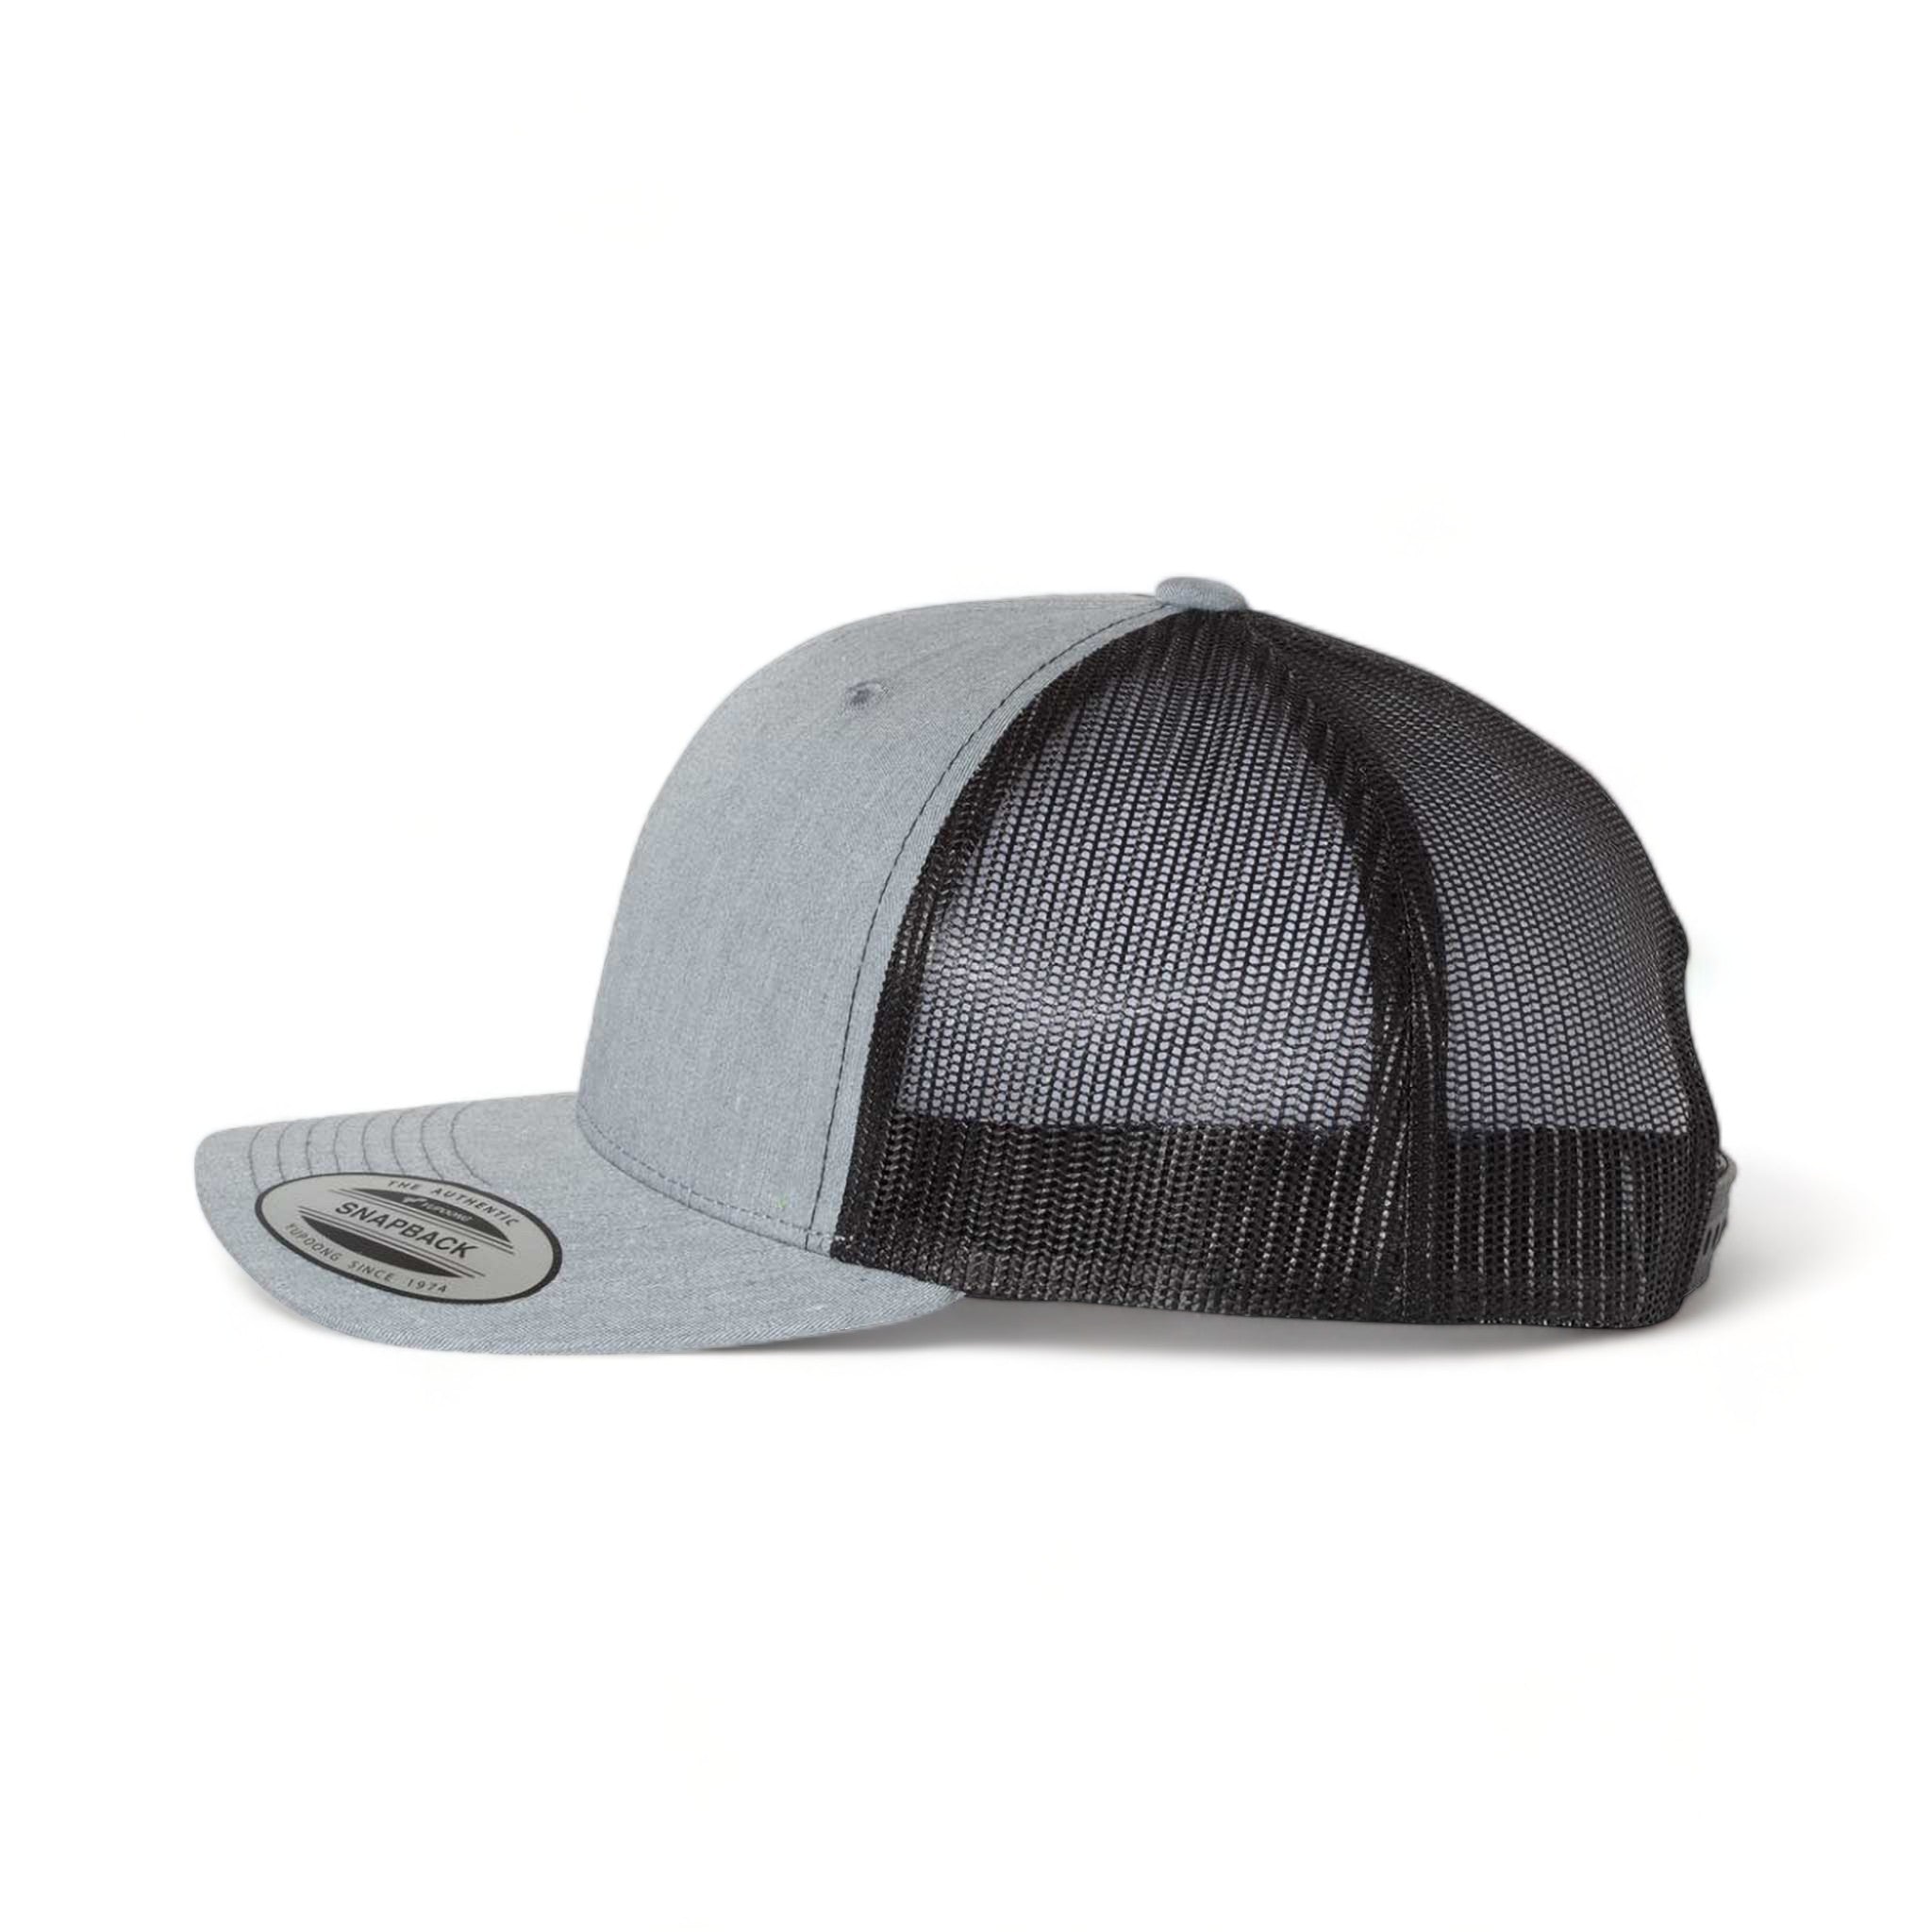 Side view of YP Classics 6606 custom hat in heather grey and black